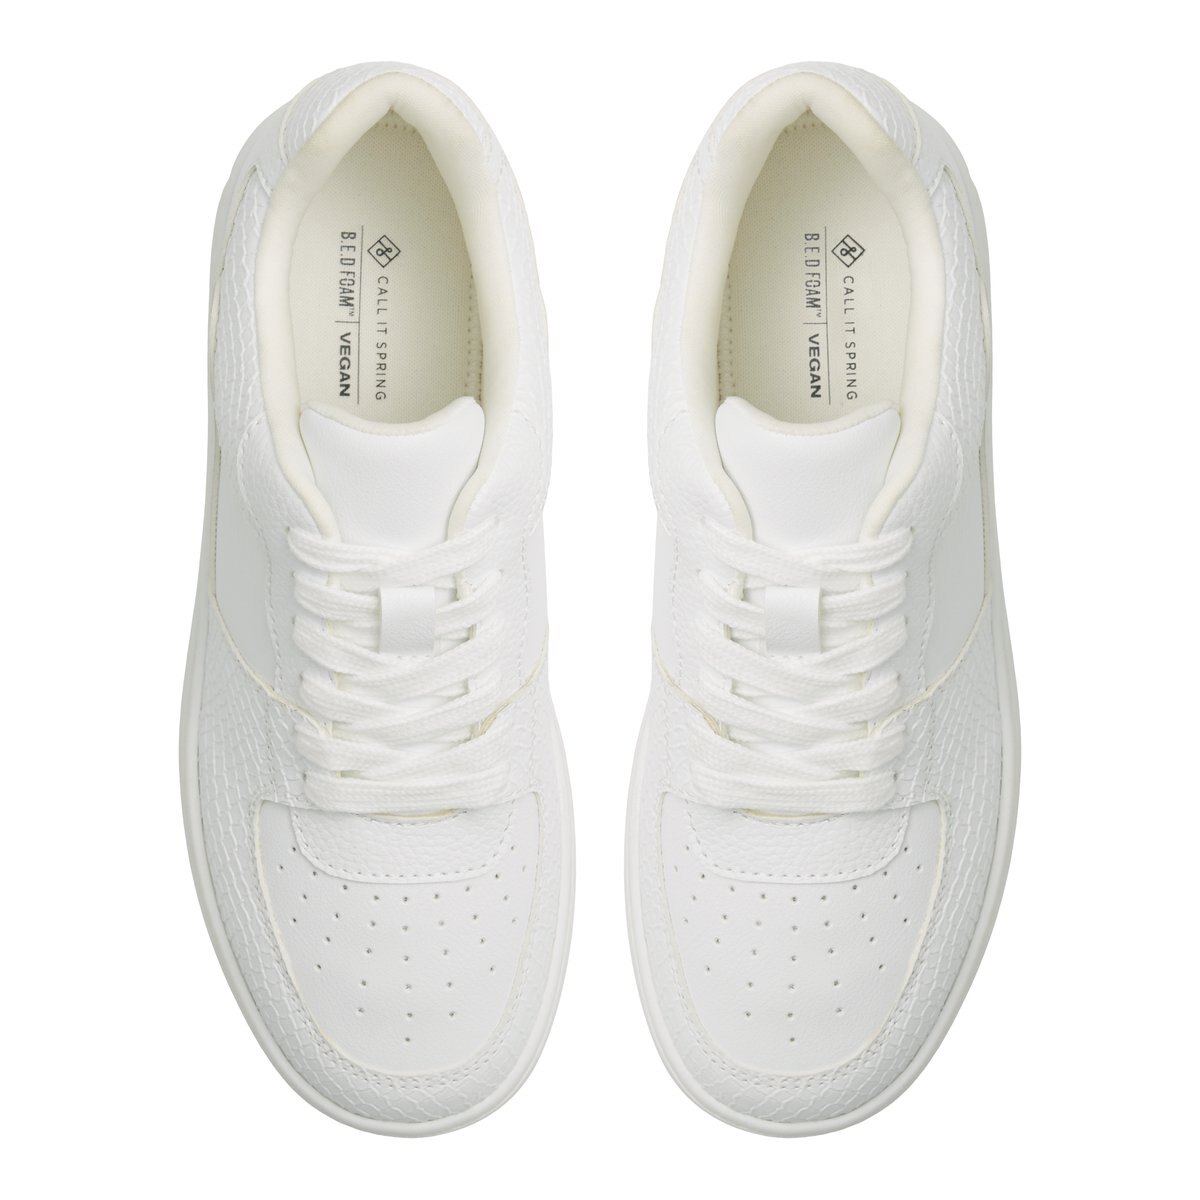 Fresh White Women's Lace Up Sneakers | Call It Spring Canada